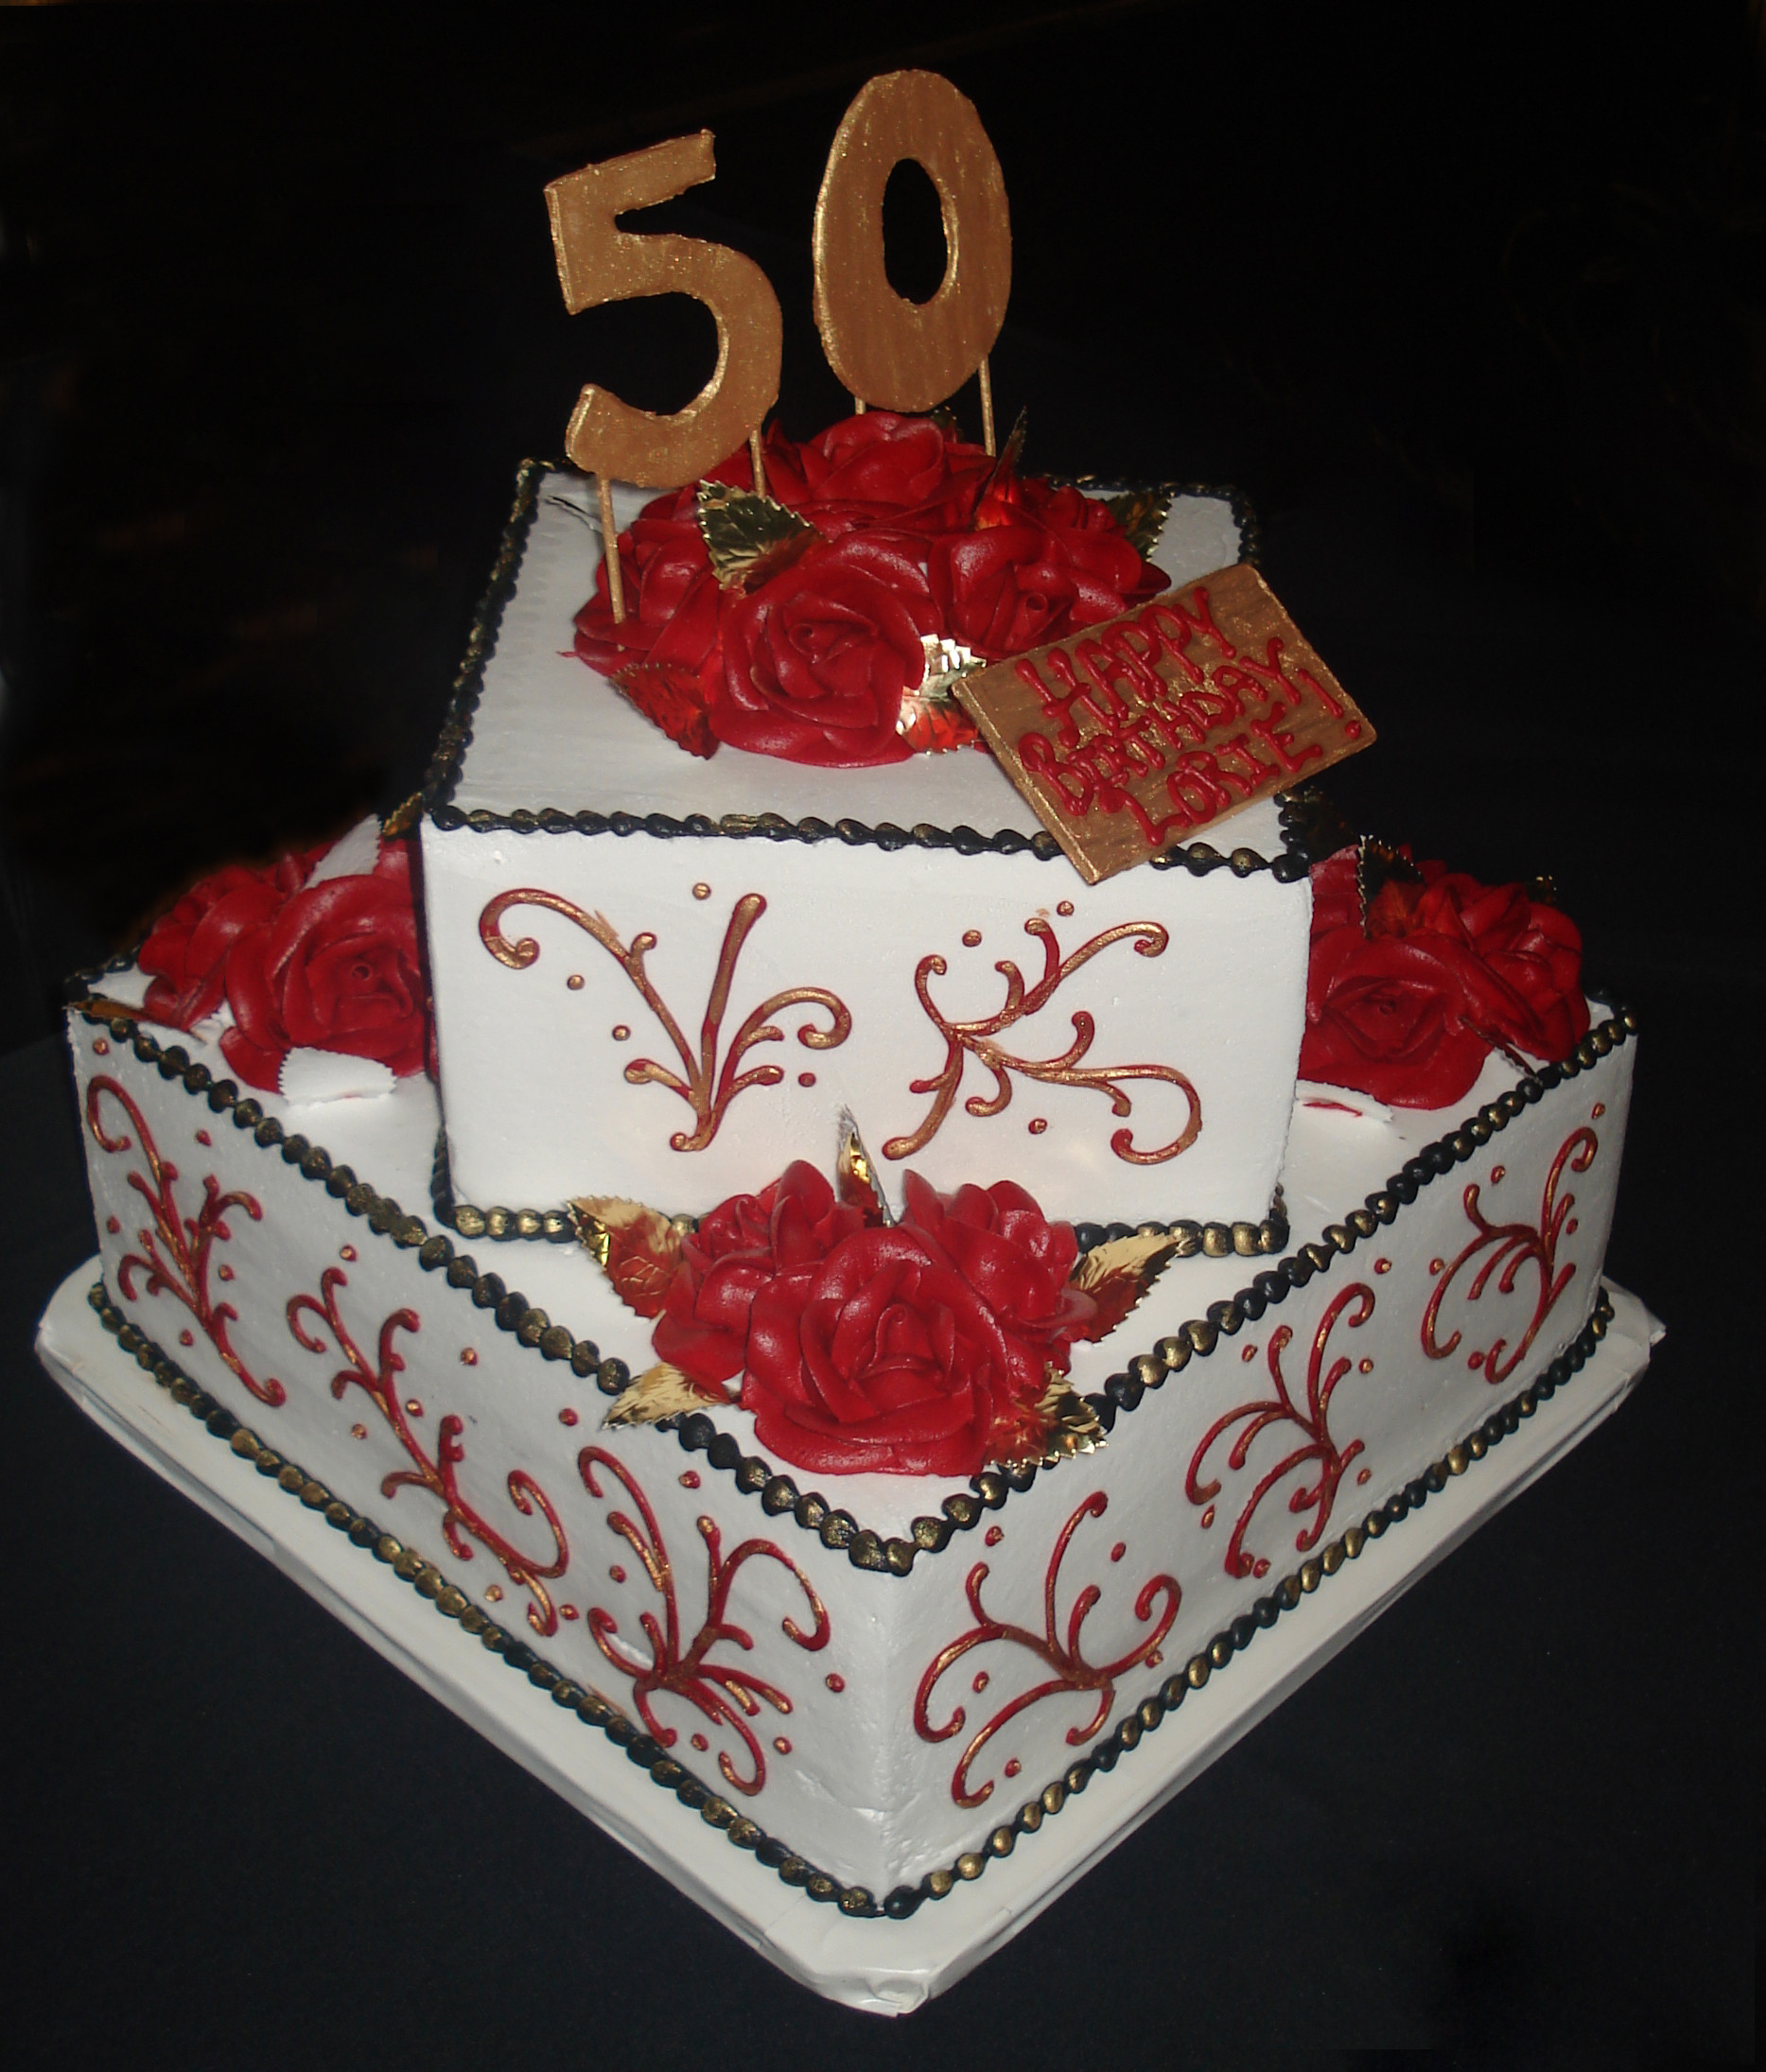 50th Birthday Cake Images
 ideas about 50th Birthday Cakes on Pinterest